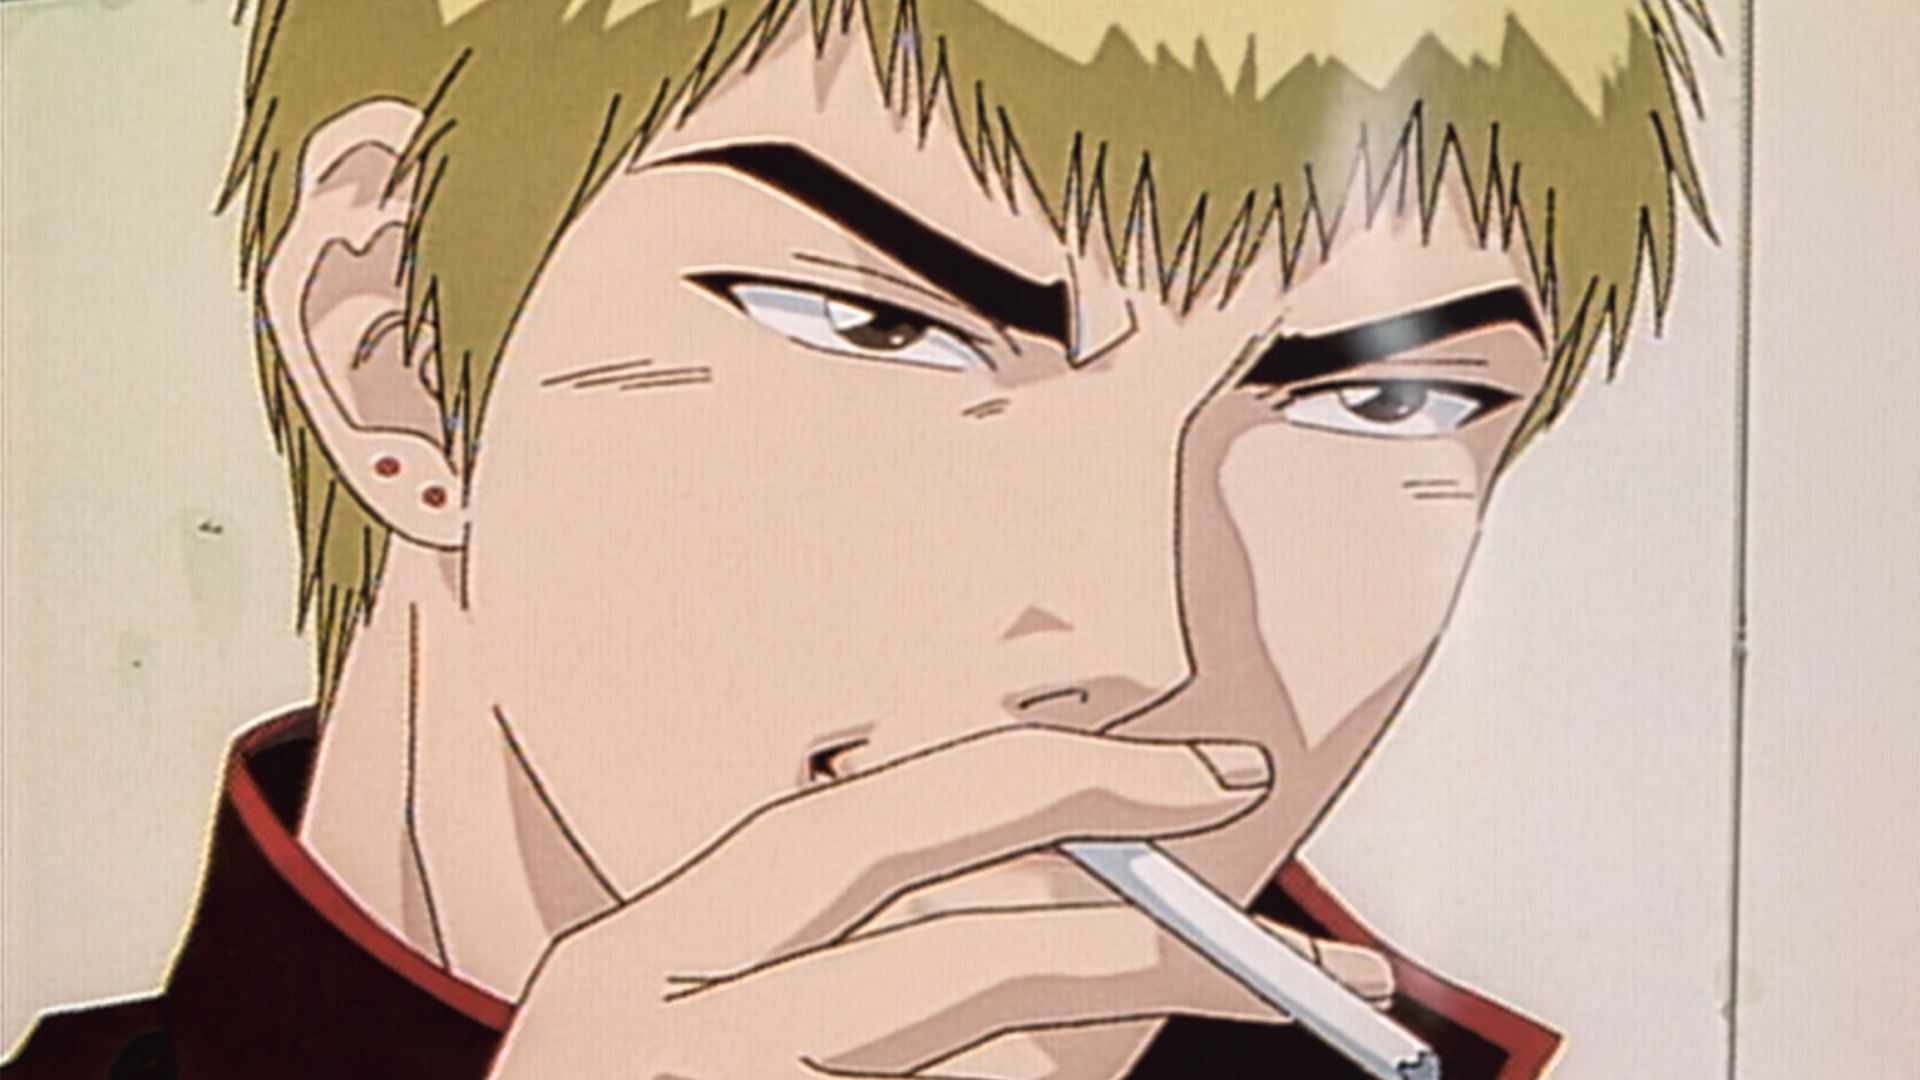 Anime character with black and blond hair smoking a cigarette on Craiyon-demhanvico.com.vn